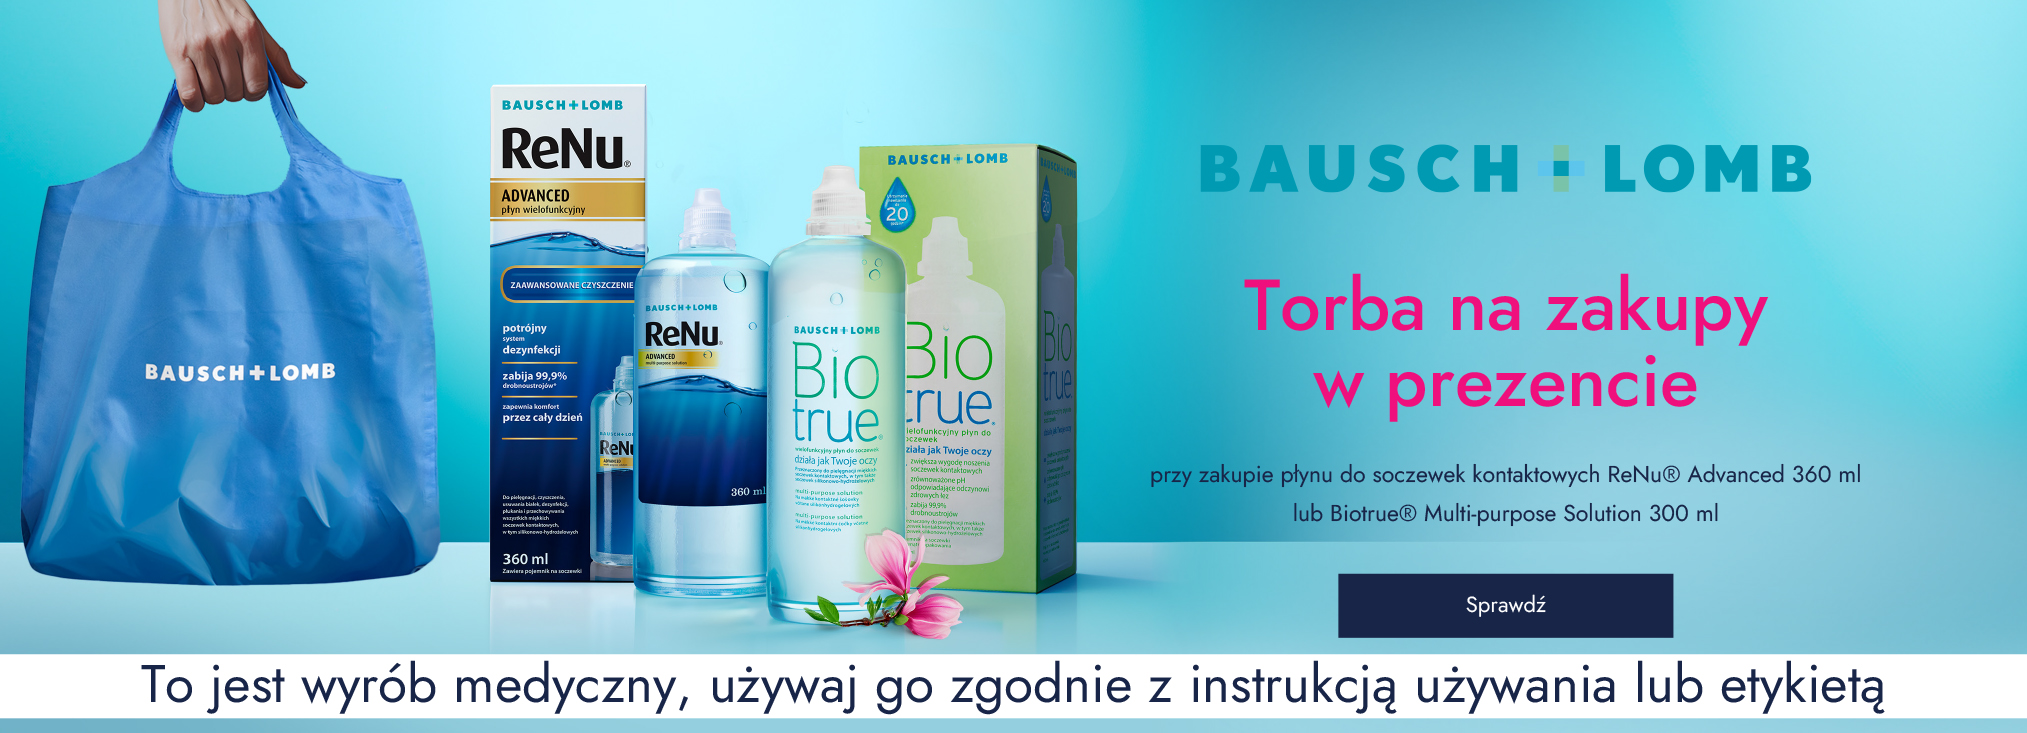 Bausch+Lomb_health&care